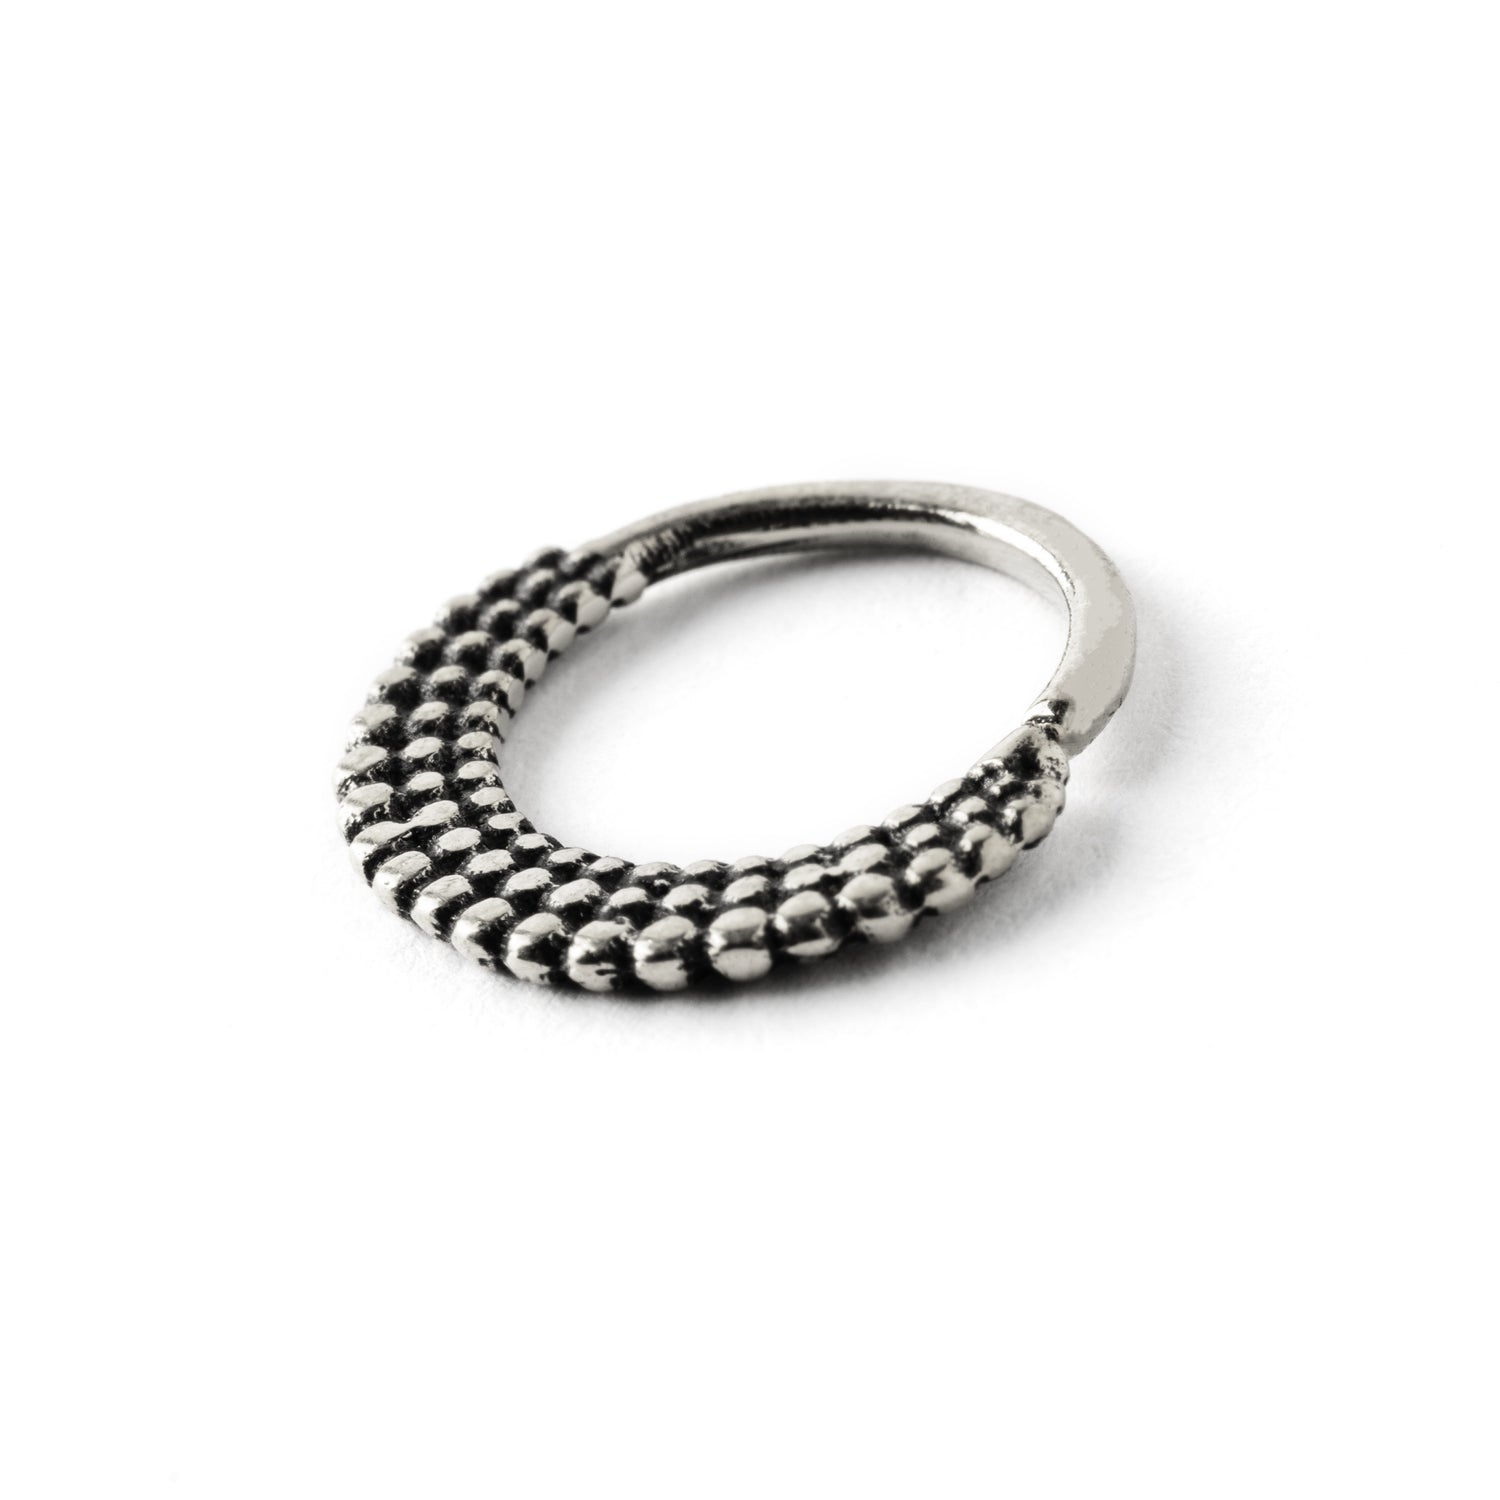 Ameya silver septum ring right side view